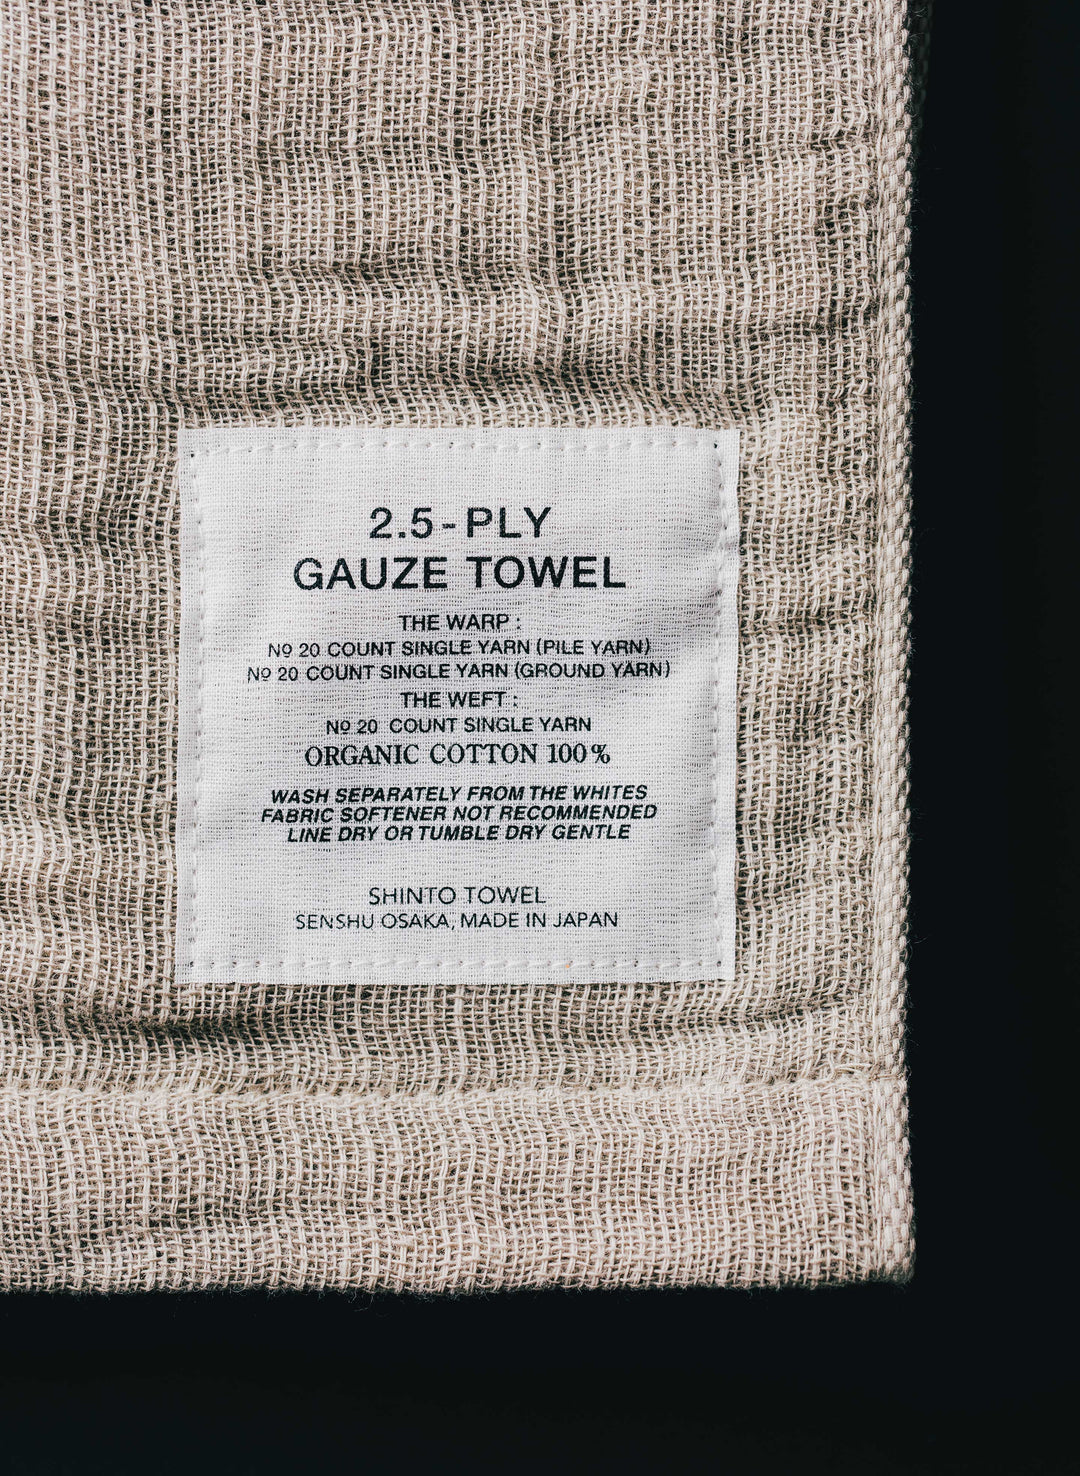 a label on a towel